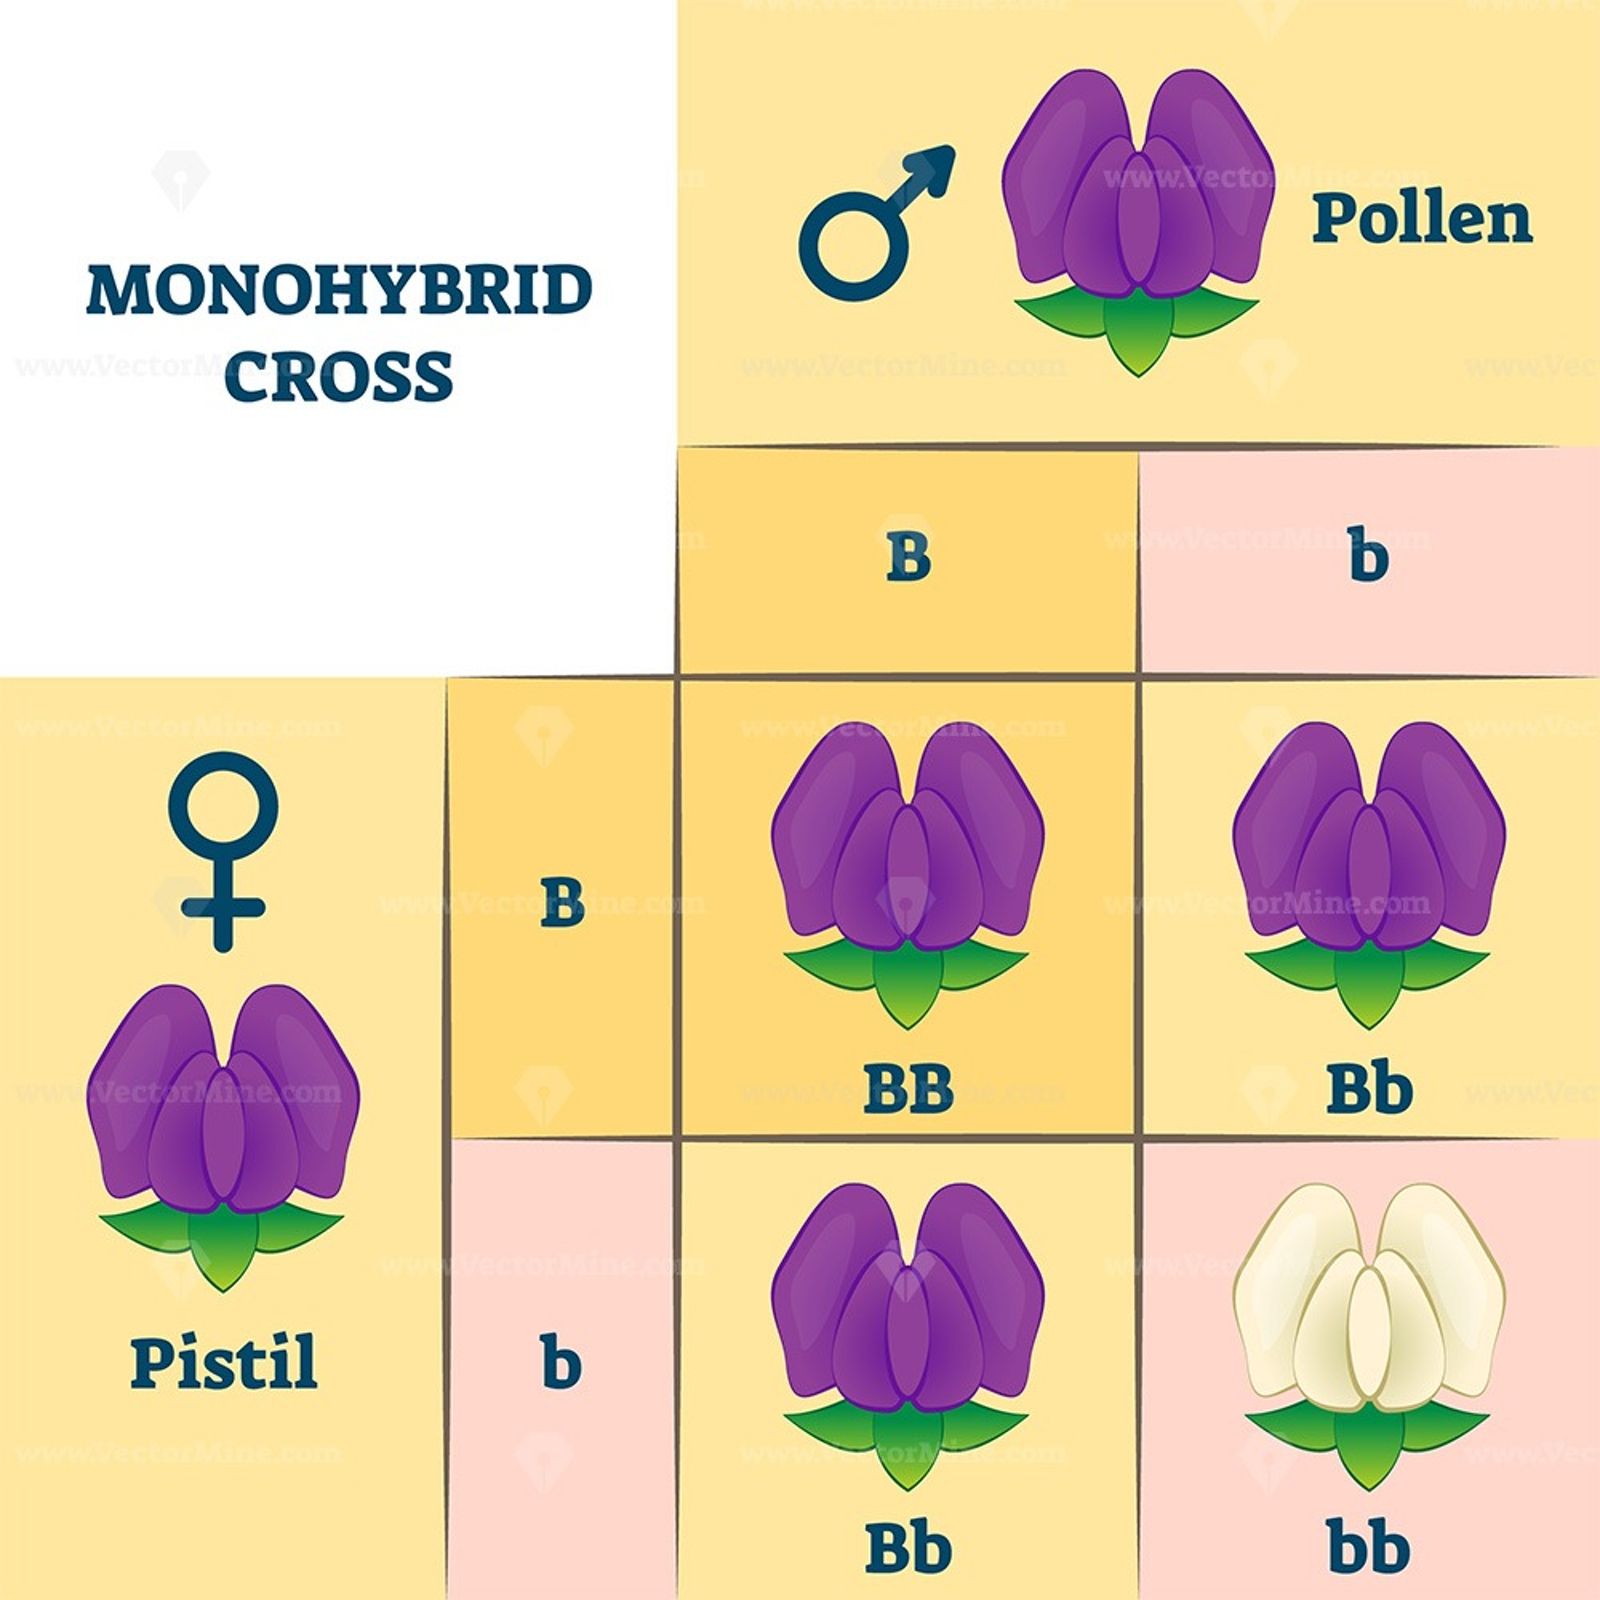 <p>:a cross between individuals that are identically heterozygous for alleles of one gene</p><ul><li><p>Experiment begins with cross between individuals that breed true</p></li><li><p>Cross produces F1 hybrid offspring</p></li><li><p>Cross between two of these F1 individuals is monohybrid cross and produces F2 generation</p></li><li><p>The frequency at which two traits appear in the second generation provides information about dominance relationship between two alleles</p></li><li><p>Dominant trait will have a <u>3:1 phenotypic ratio</u></p></li></ul>